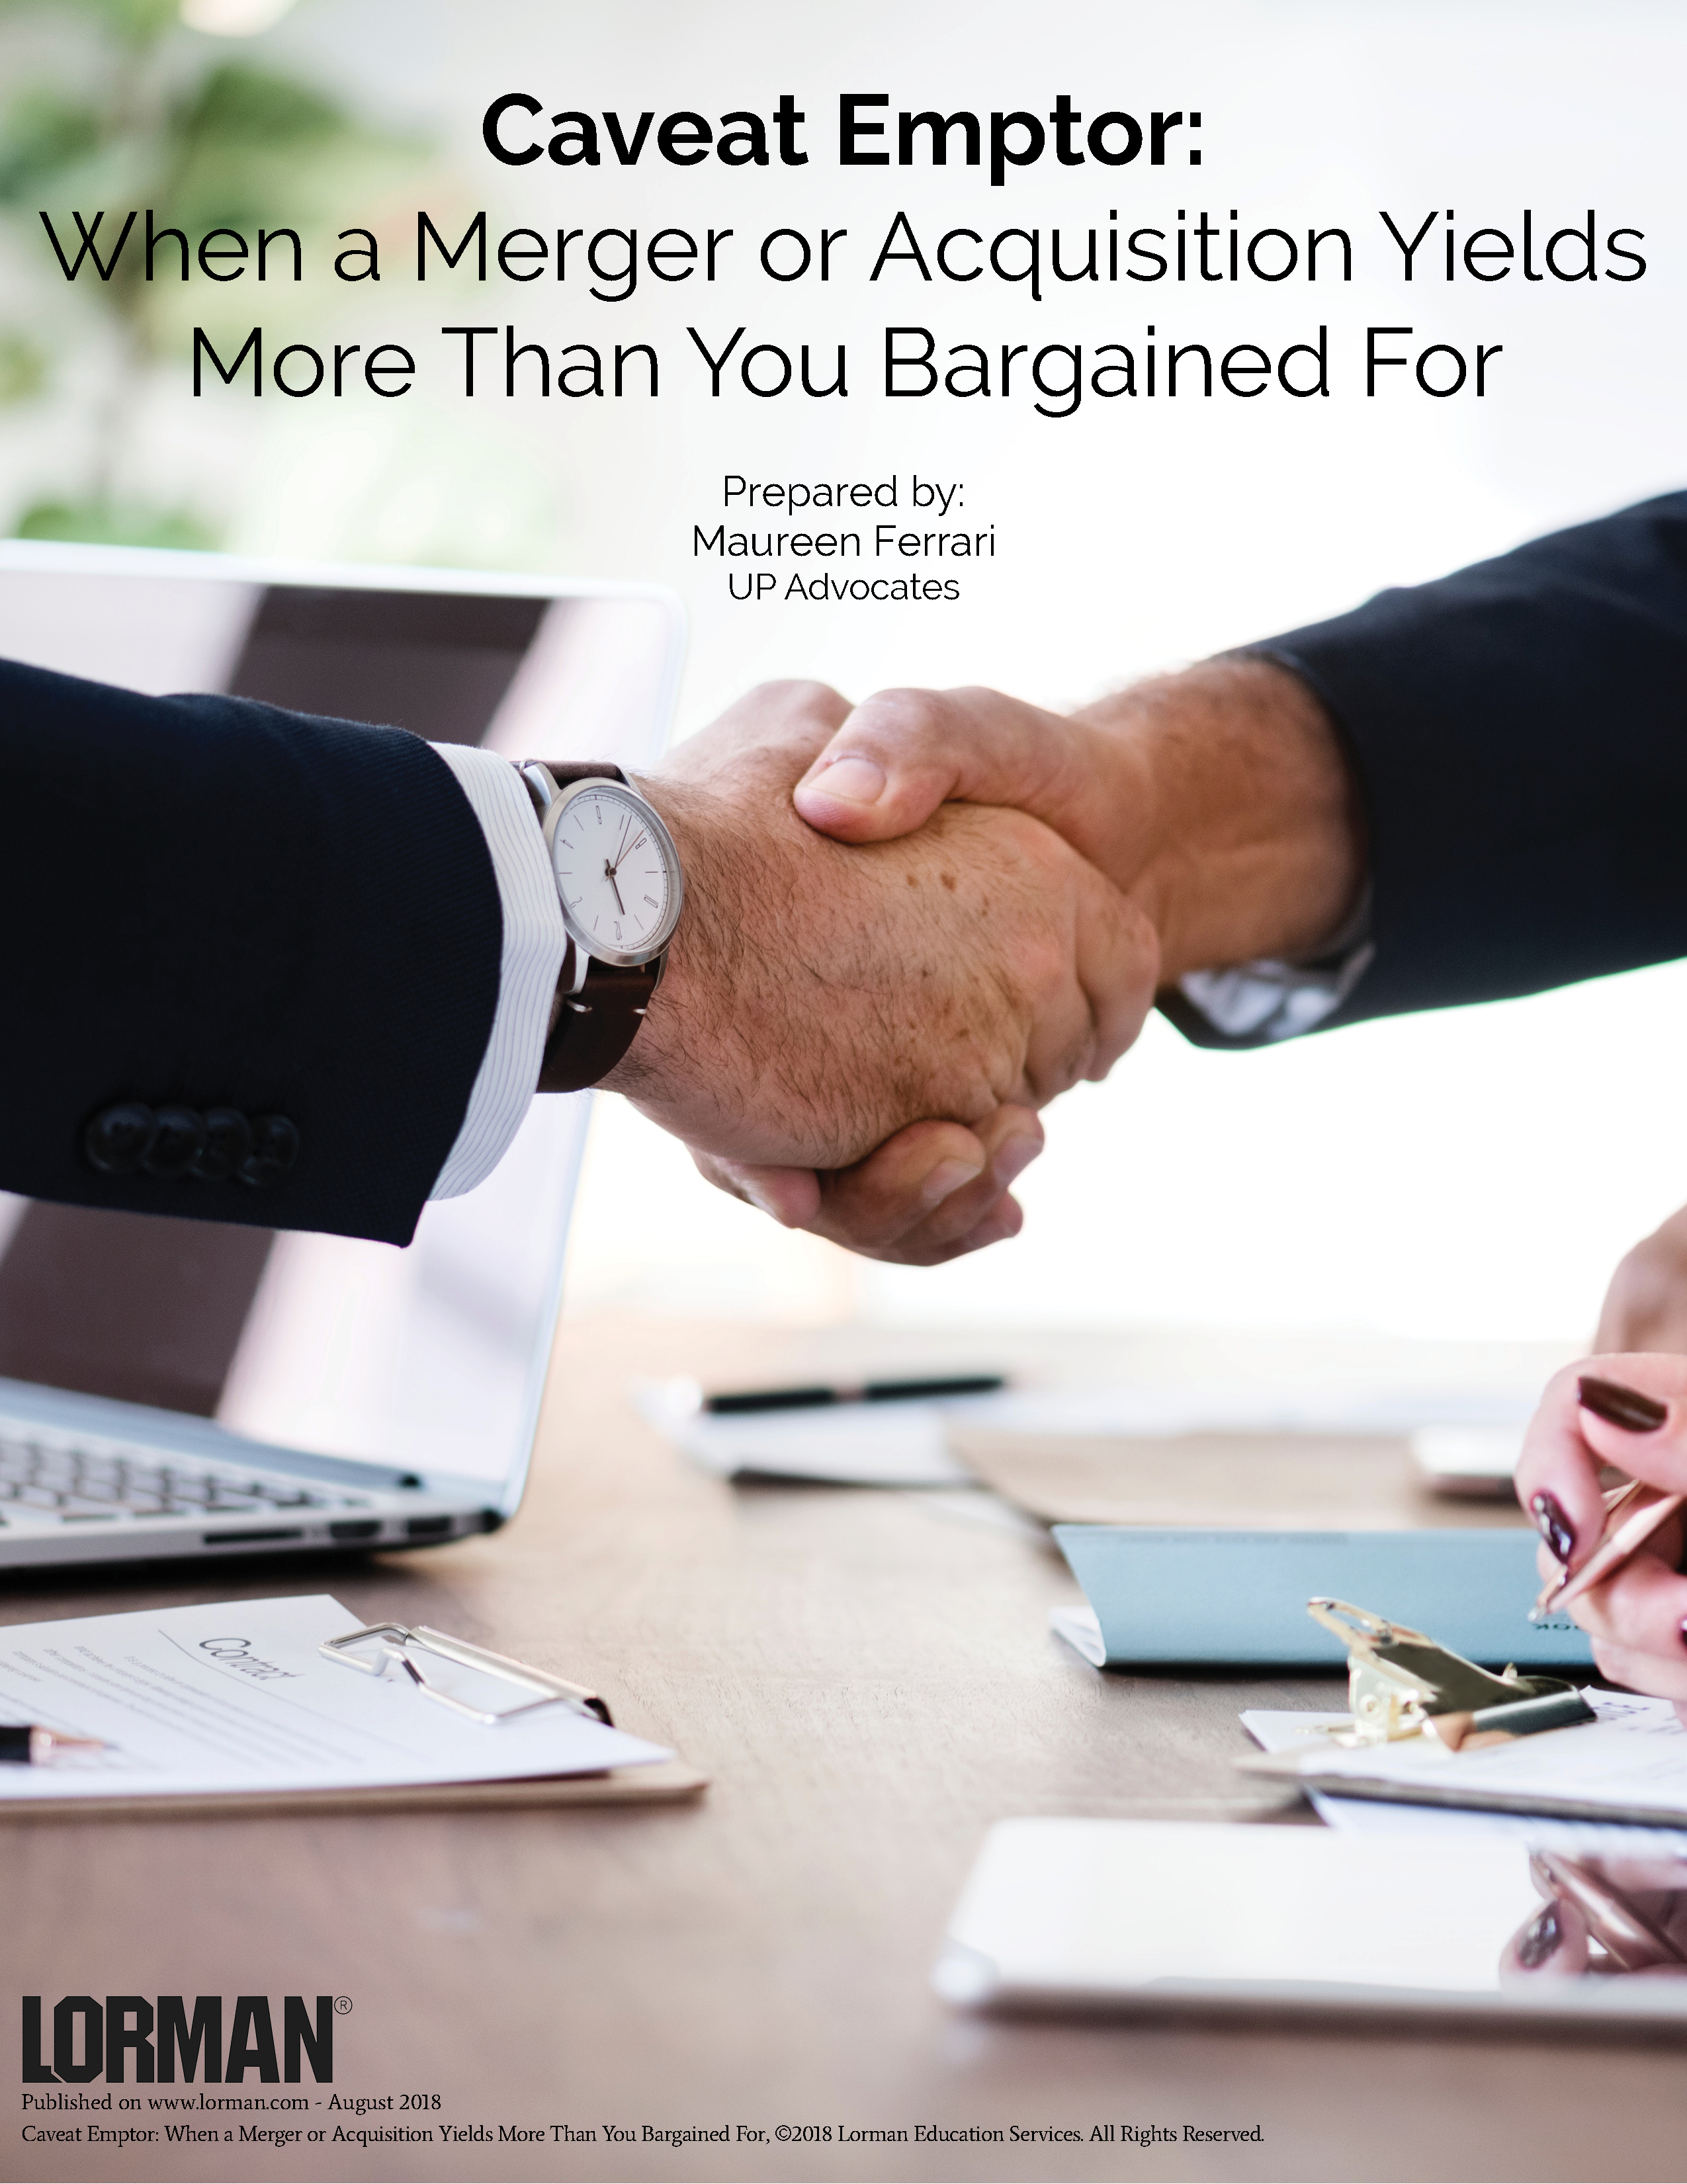 Caveat Emptor: When a Merger or Acquisition Yields More Than You Bargained For